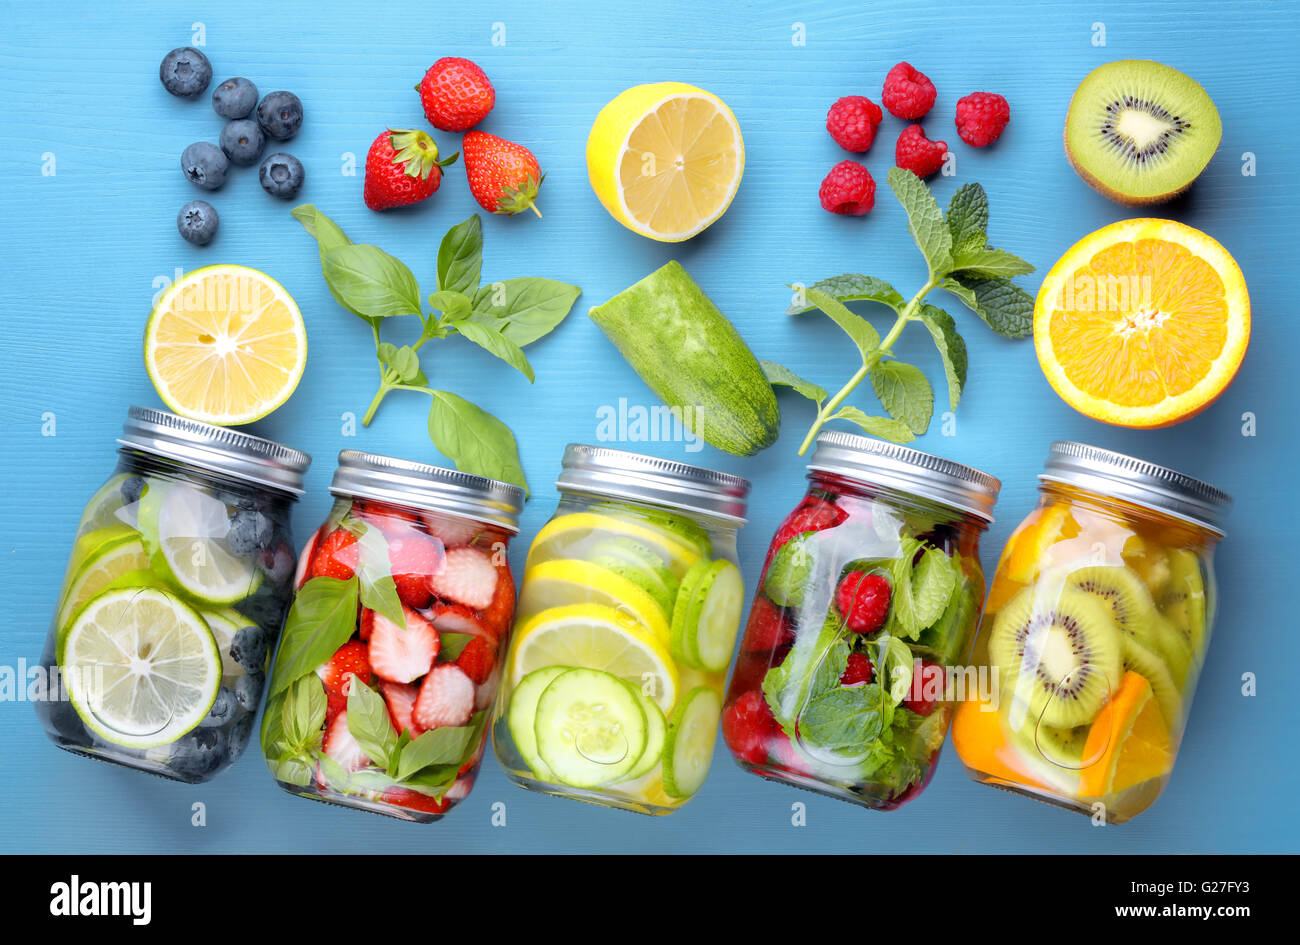 Healthy detox water with fruits.... Stock Photo